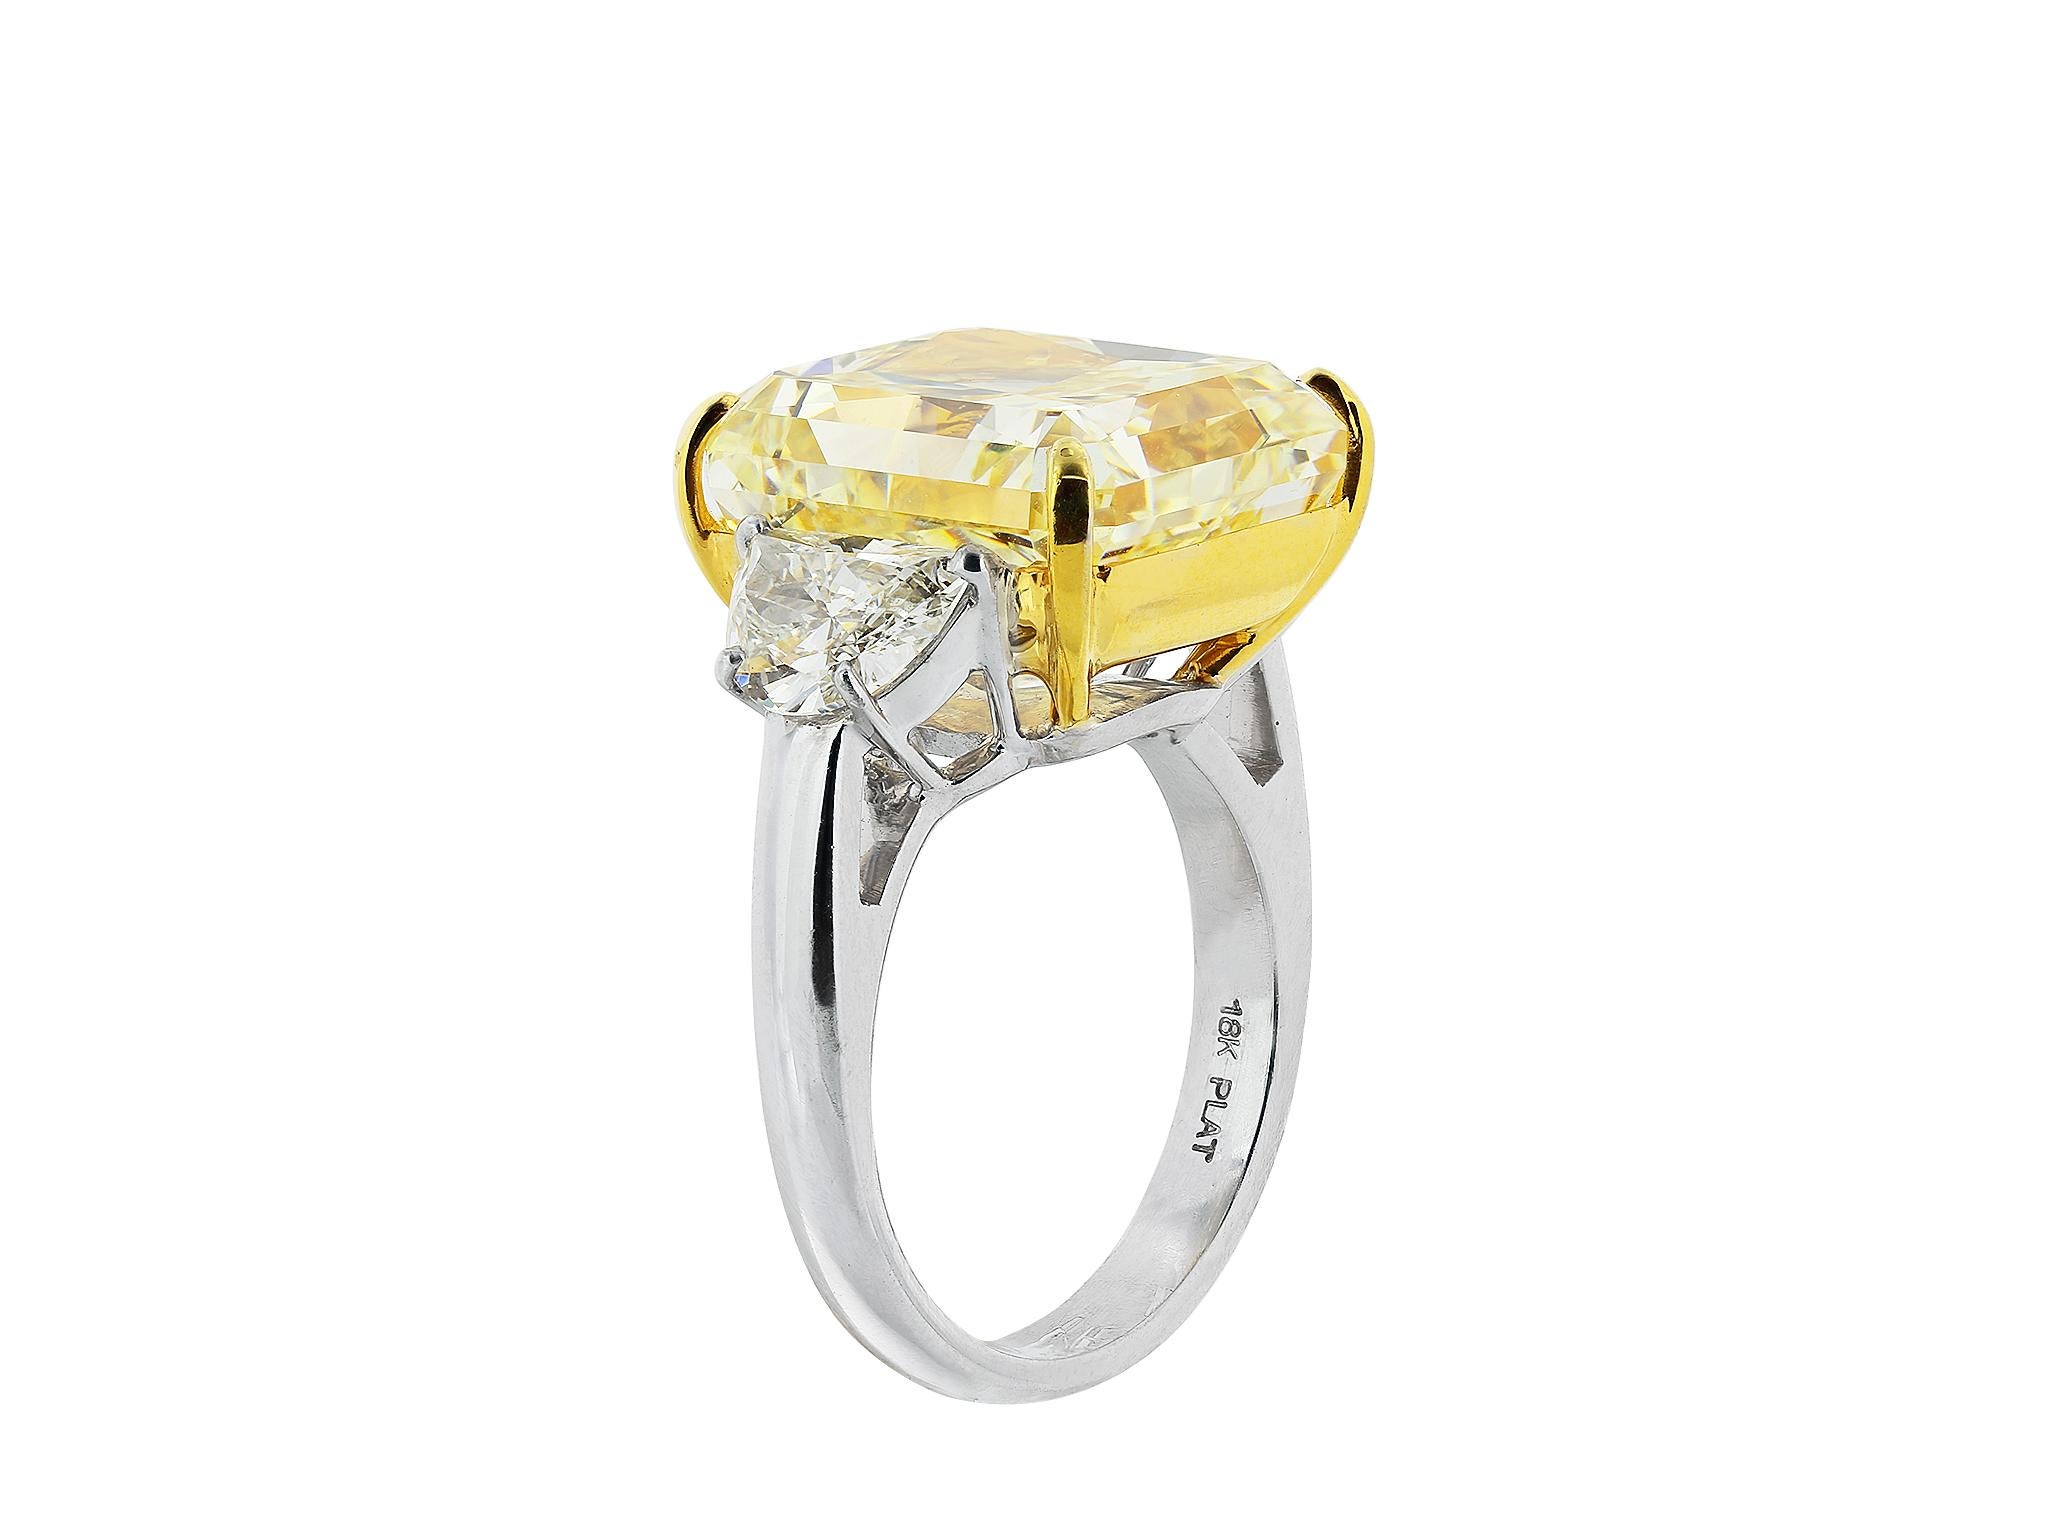 Rare and Magnificent Platinum & 18 karat yellow gold custom made 3 stone ring natural square emerald cut canary diamond (7.03ct fancy yellow/VS-1 w/GIA cert #10237242) flanked by 2 step cut trapezoid diamonds (1.22 Cts TW F/VS-1) custom made 3 stone